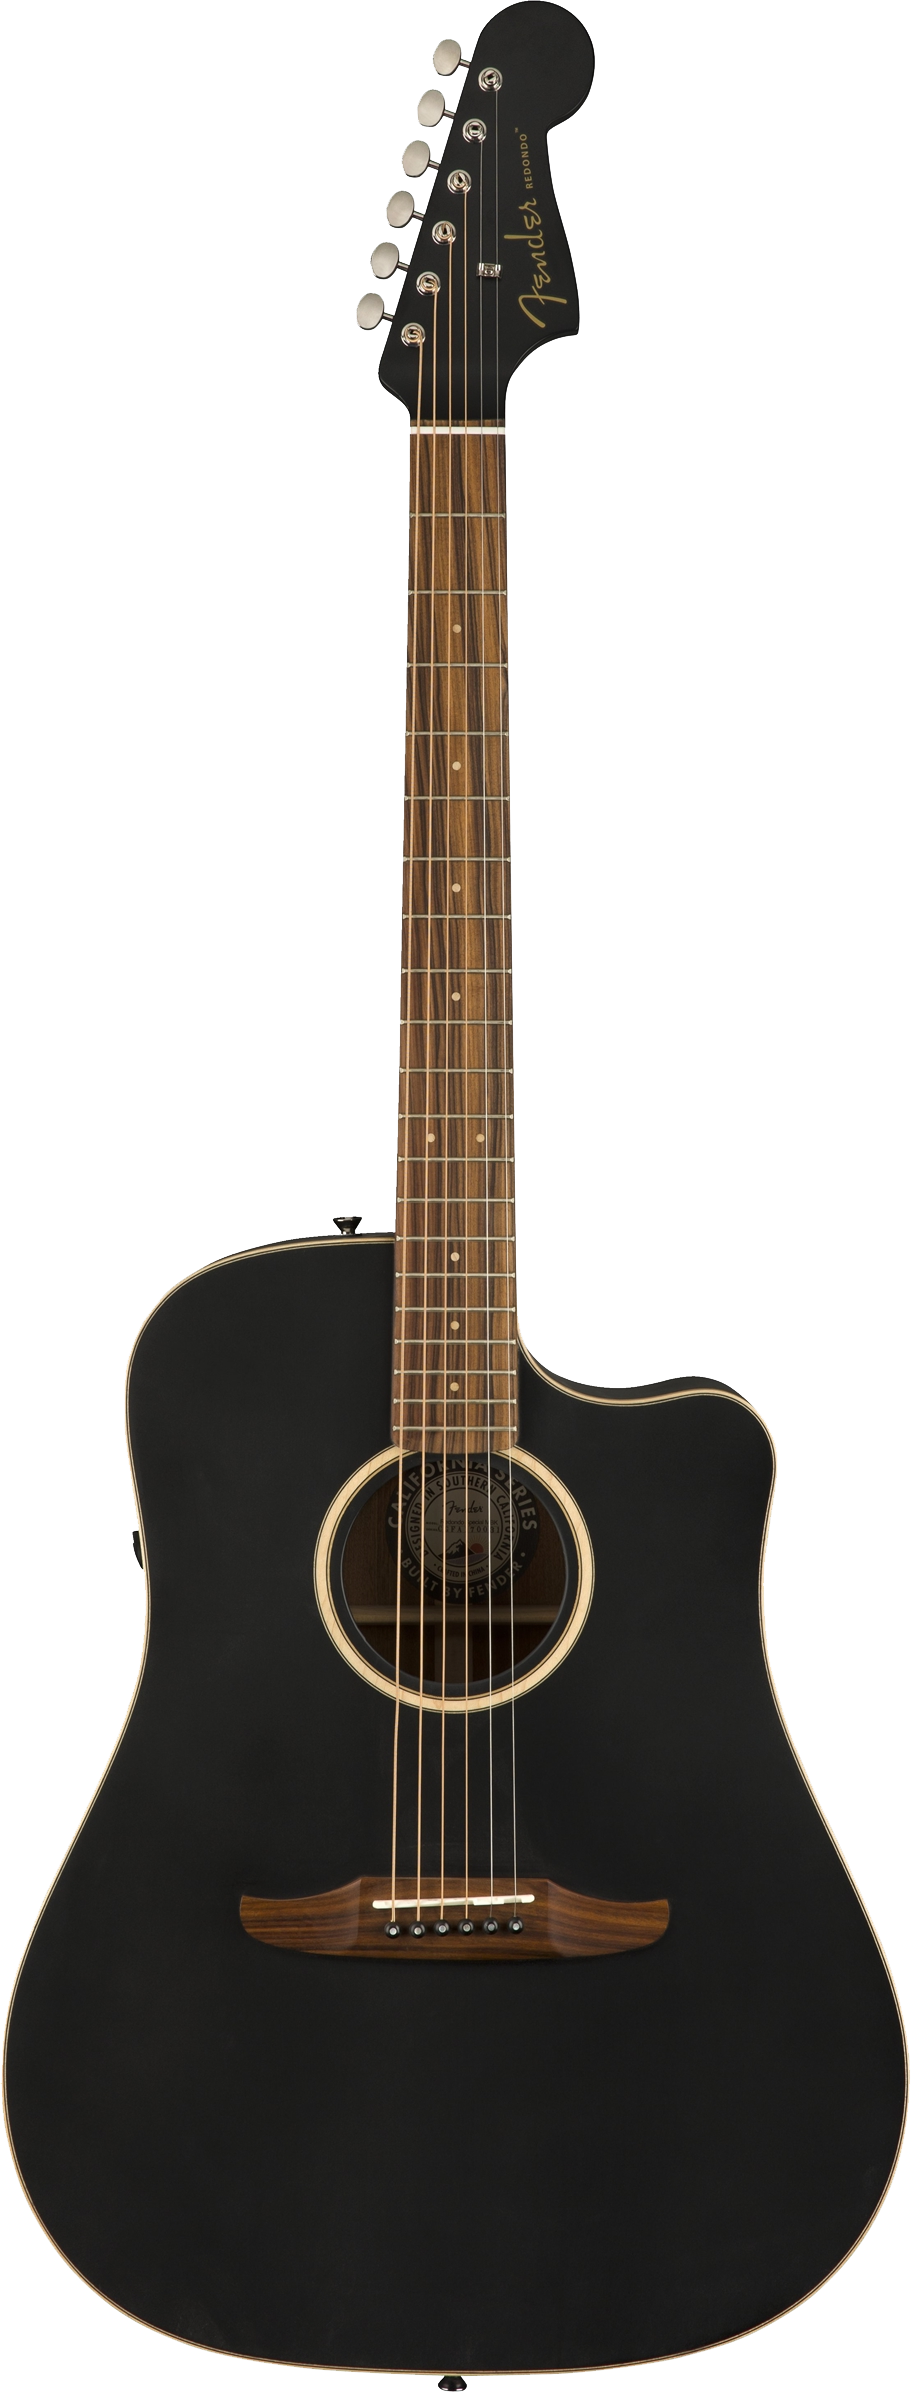 Fender Redondo Special Acoustic / Electric Guitar - Jetty Black